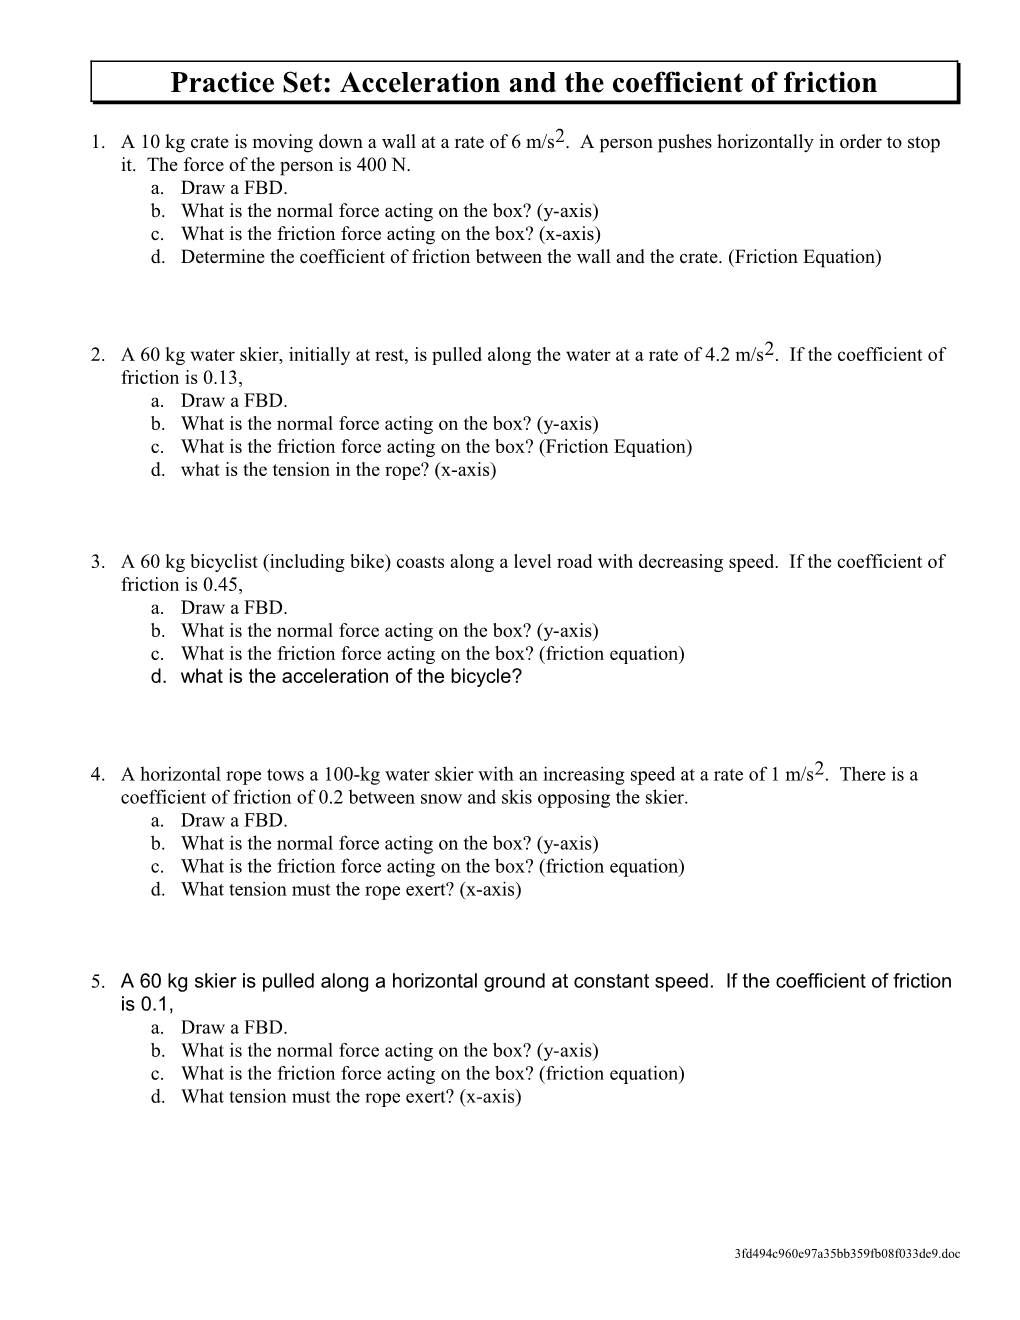 Worksheet N: Problems with Linear Motion and the Coefficient of Friction